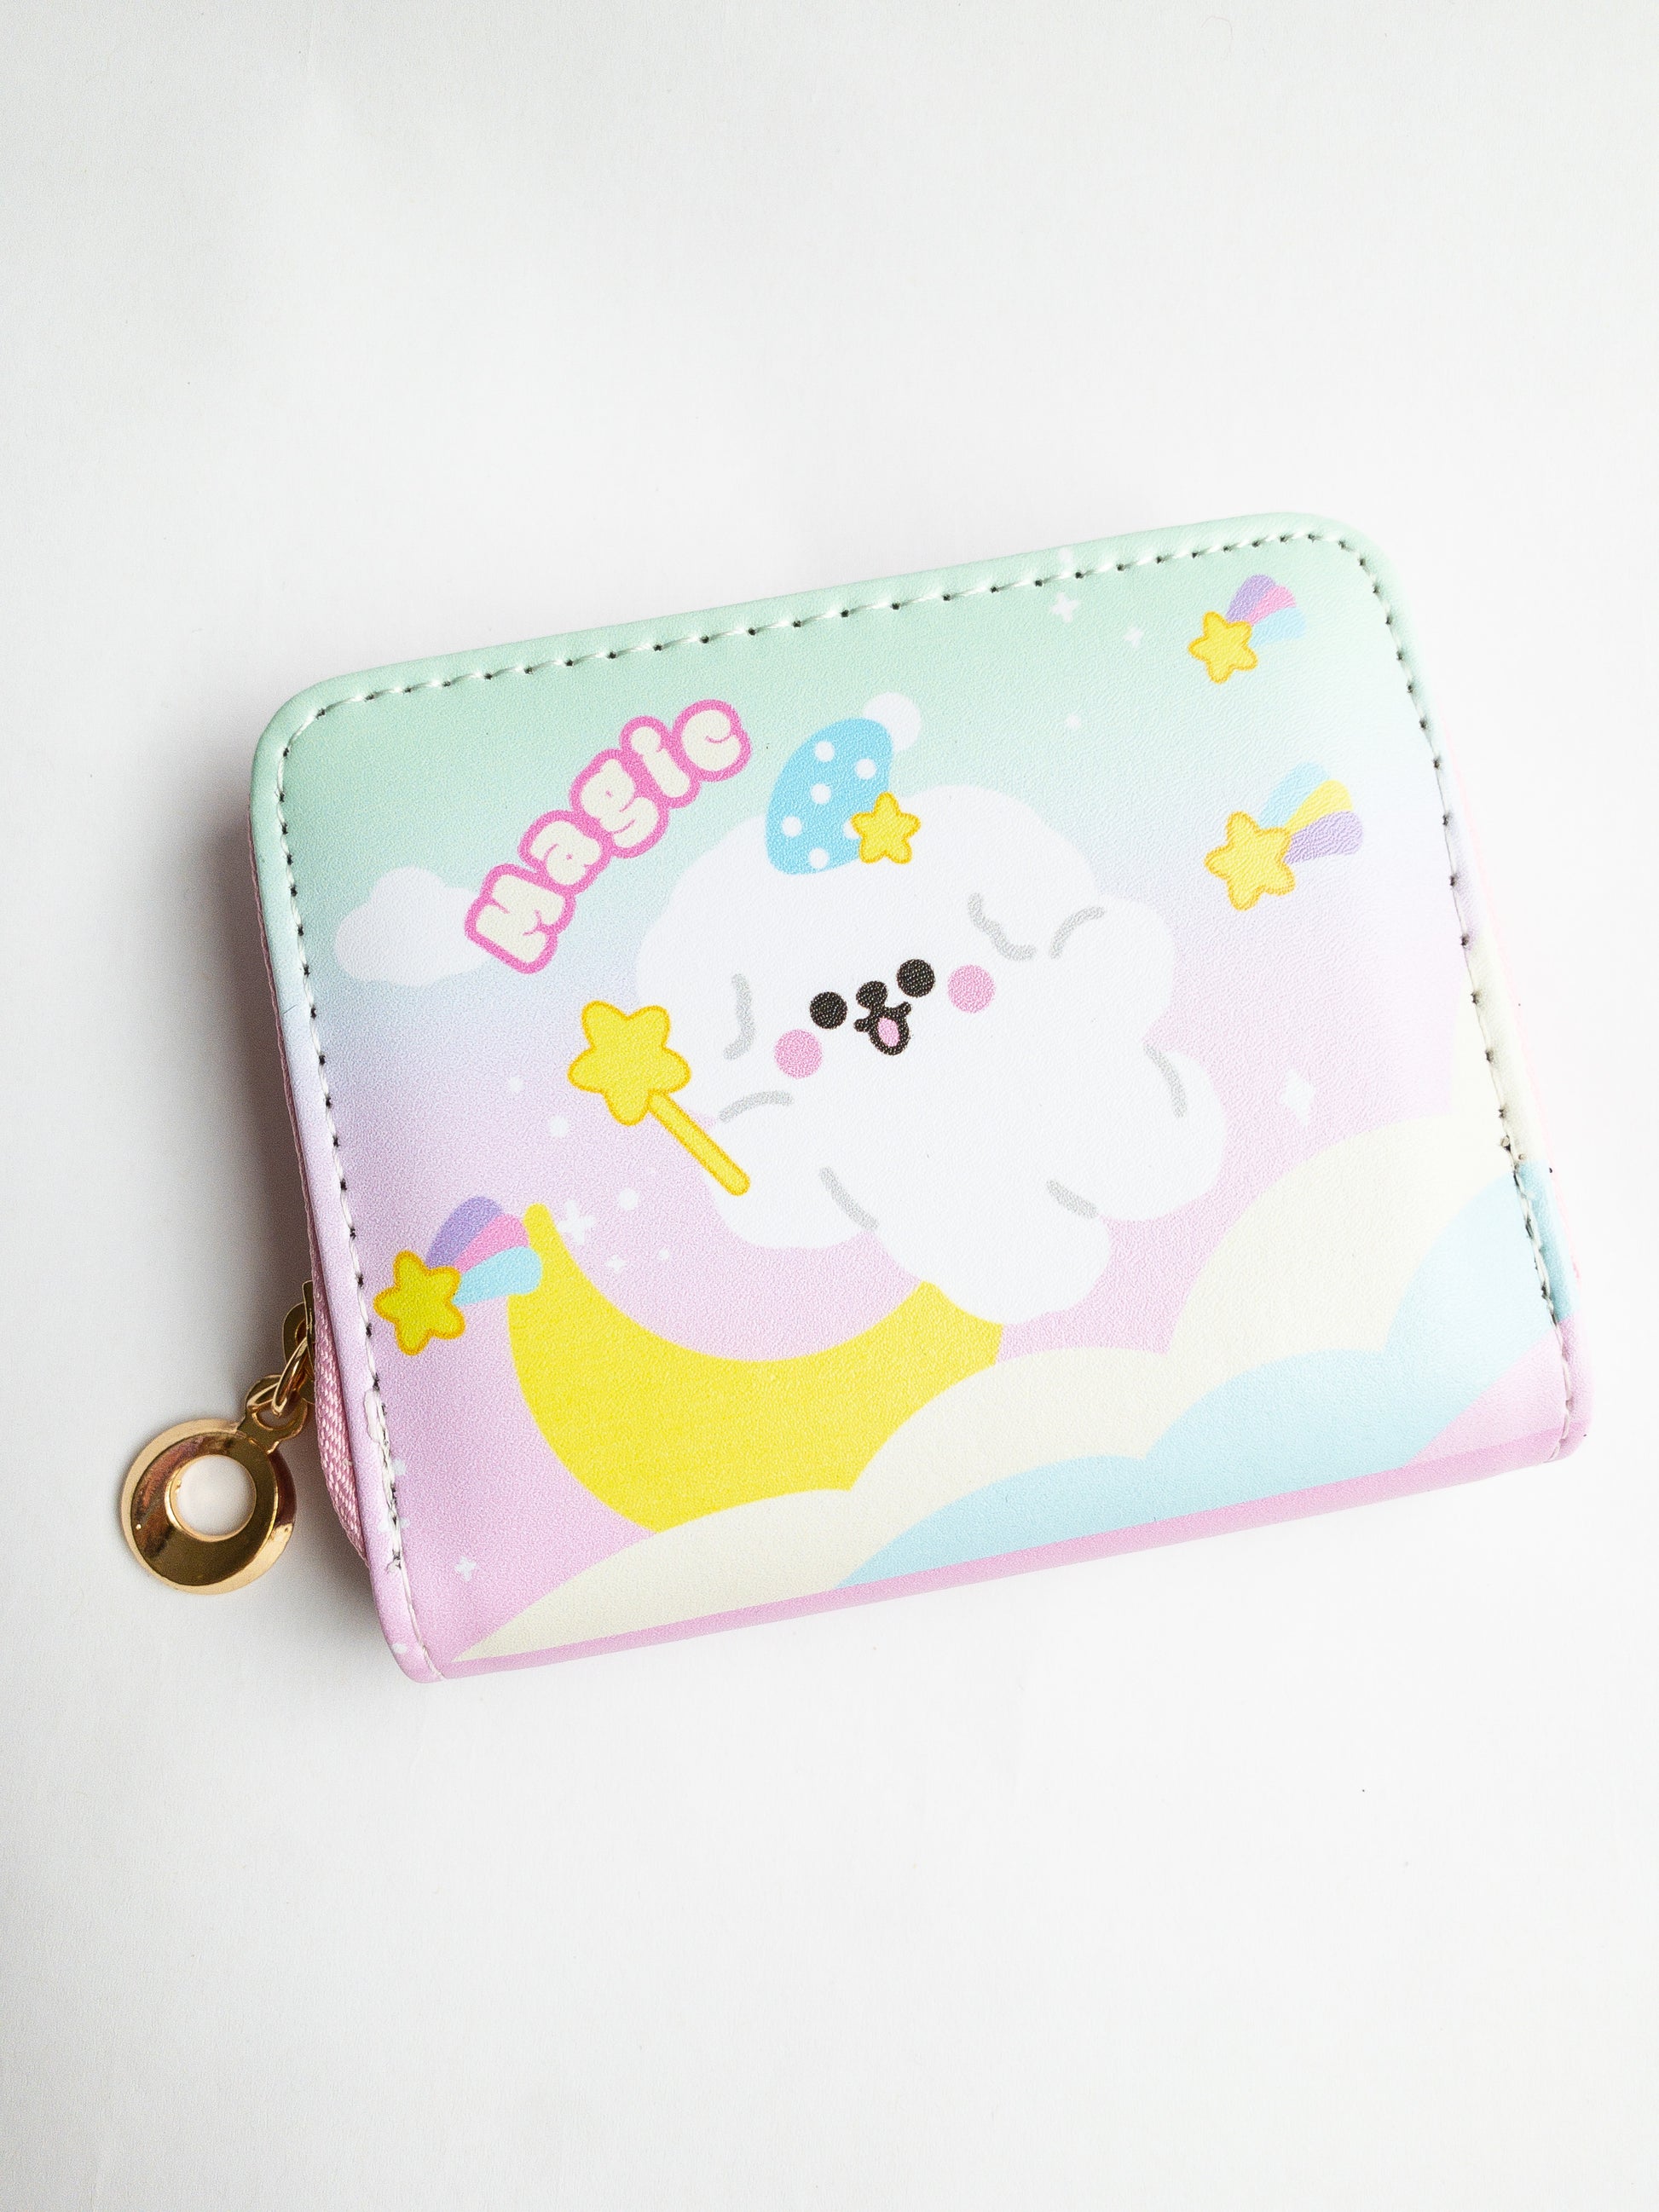 The Shooting Star Wallet! A magical little fluffy dog soars through a pastel rainbow sky with shooting stars. A playful zip close wallet with card slots and a coin pocket in the center, it’s perfect for keeping your small items organized! Reach for the stars with this compact wallet.